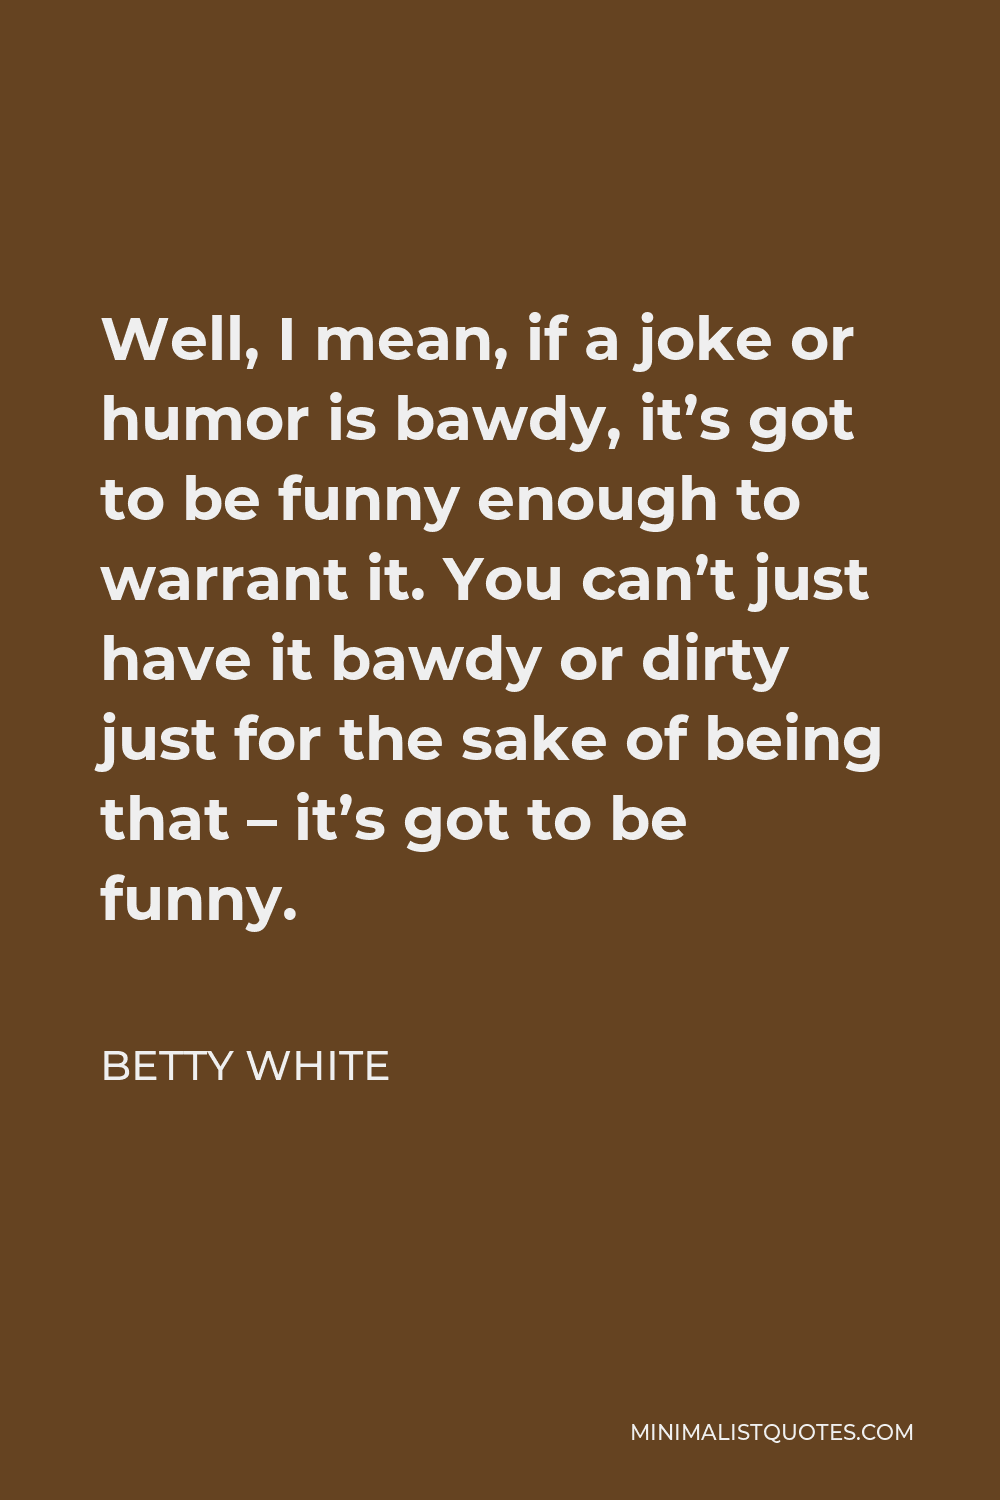 Betty White Quote - Well, I mean, if a joke or humor is bawdy, it’s got to be funny enough to warrant it. You can’t just have it bawdy or dirty just for the sake of being that – it’s got to be funny.